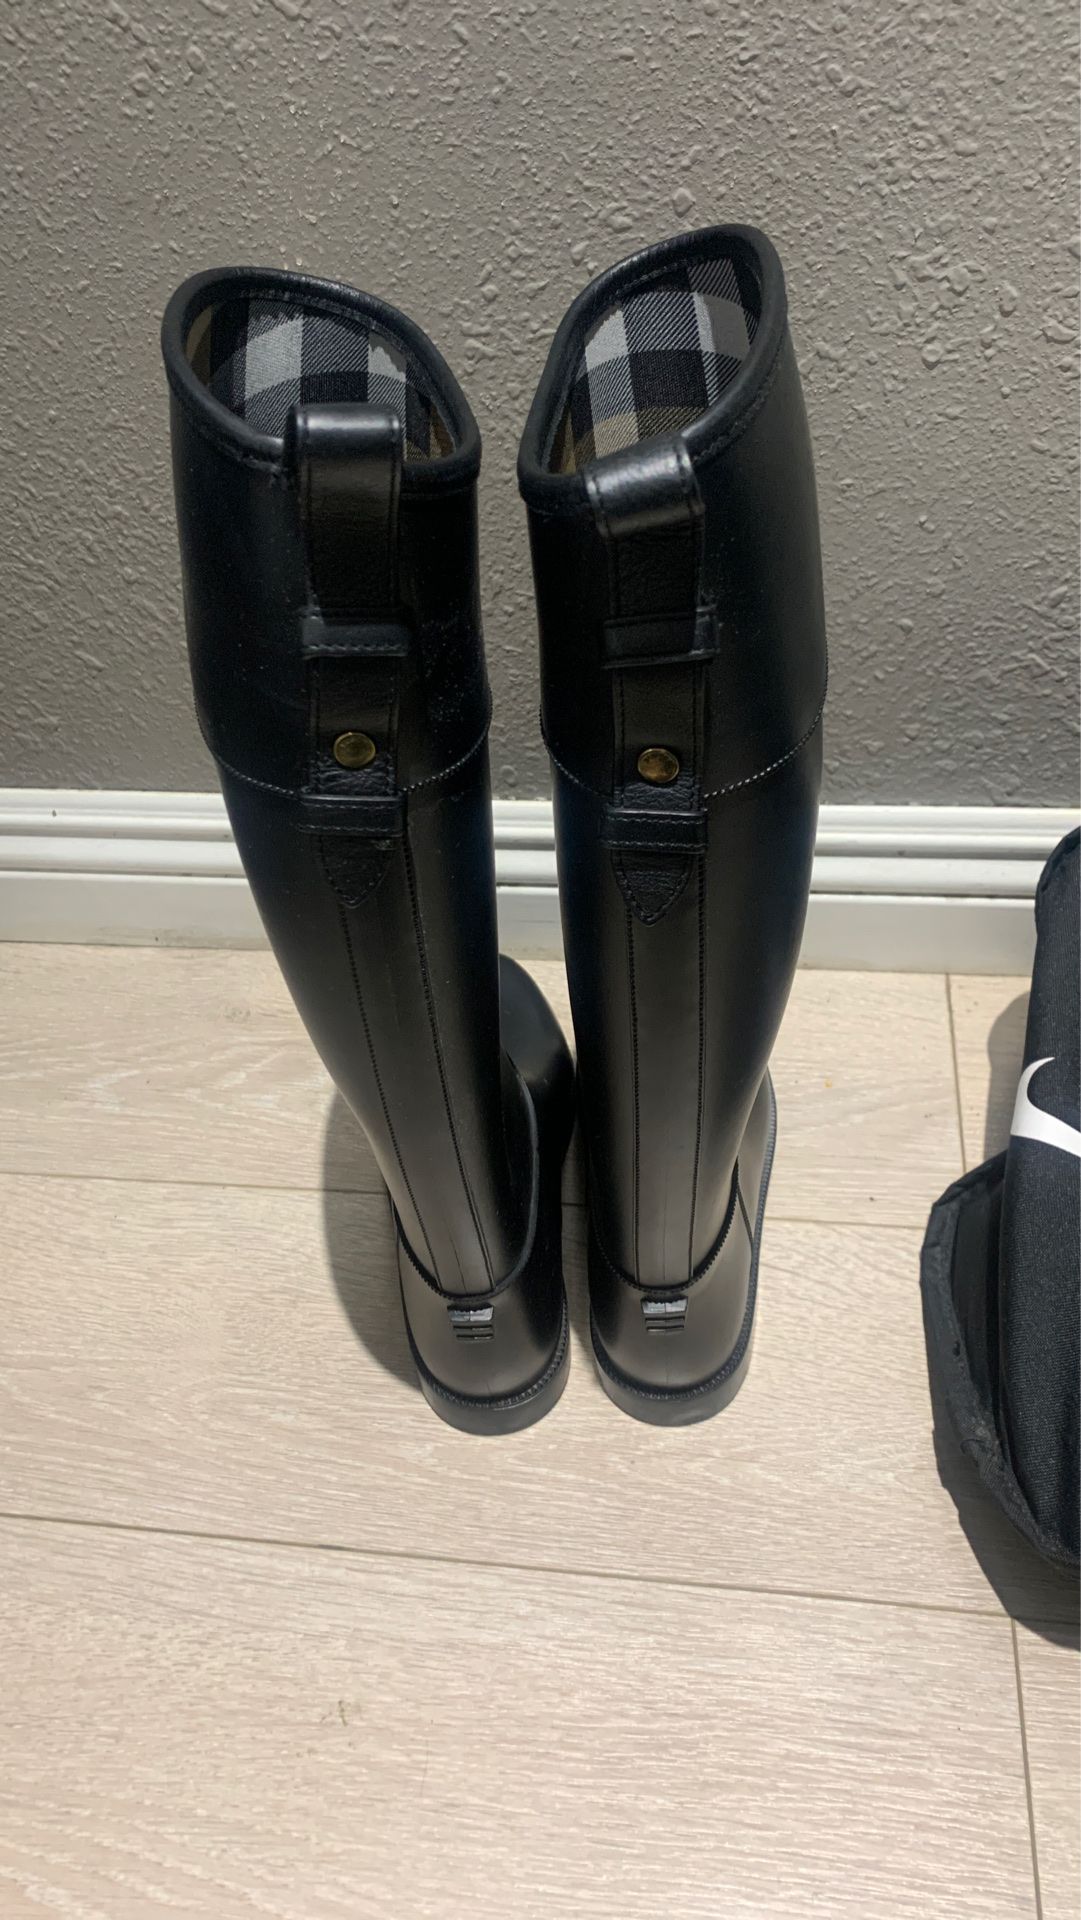 Authentic Burberry rain and snow boots